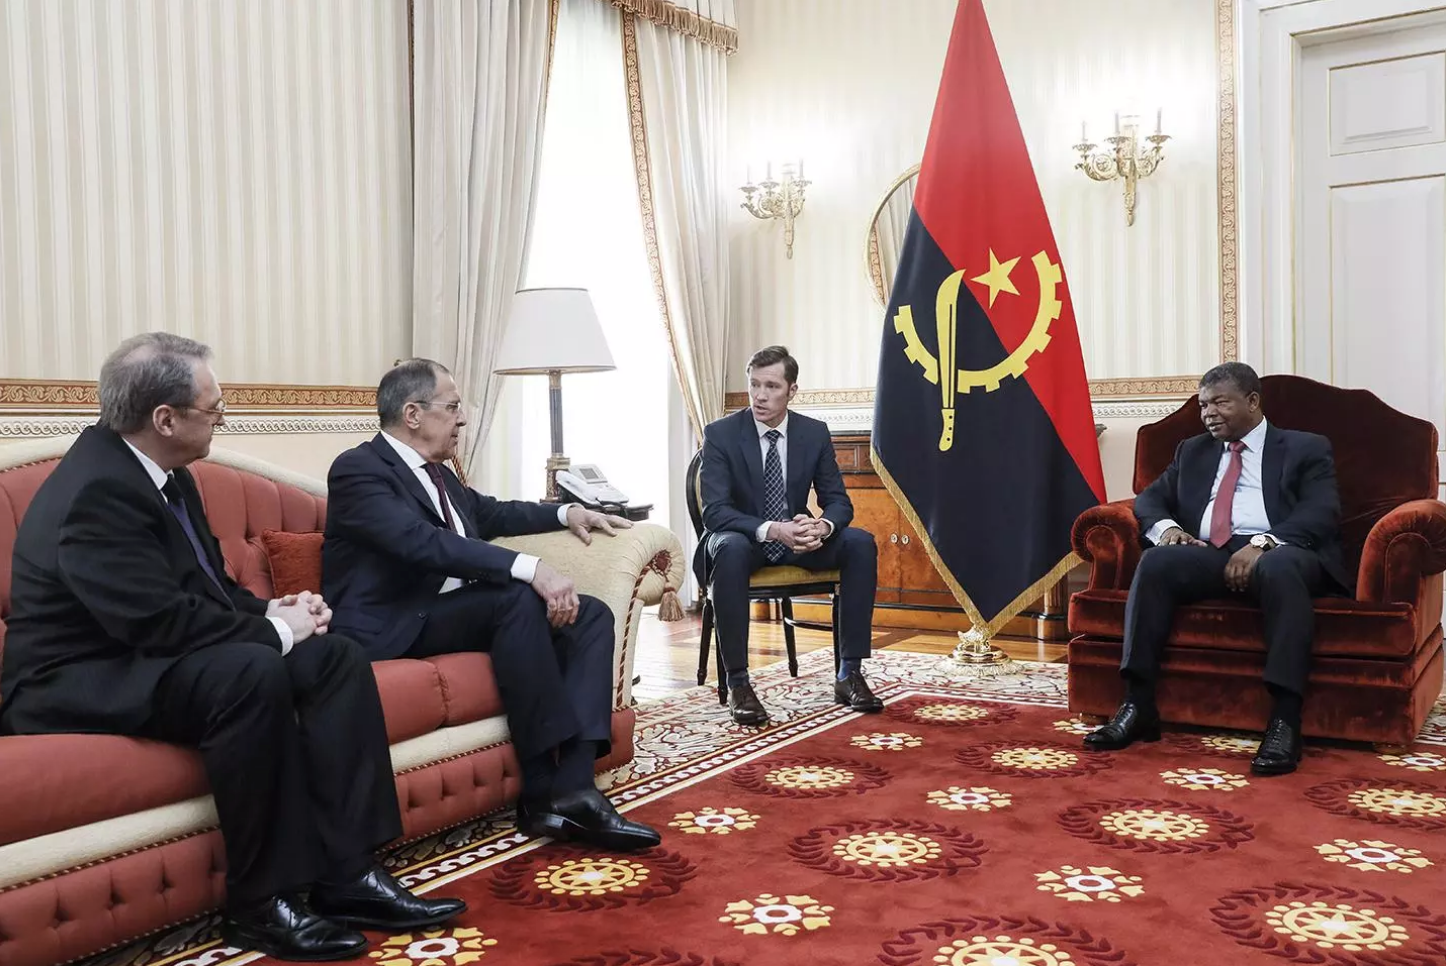 Russian Foreign Minister Sergei Lavrov, second from left, meets with Angolan President Joao Lourenco. Image by Alexander Shcherbak. Angolan, 2018. 